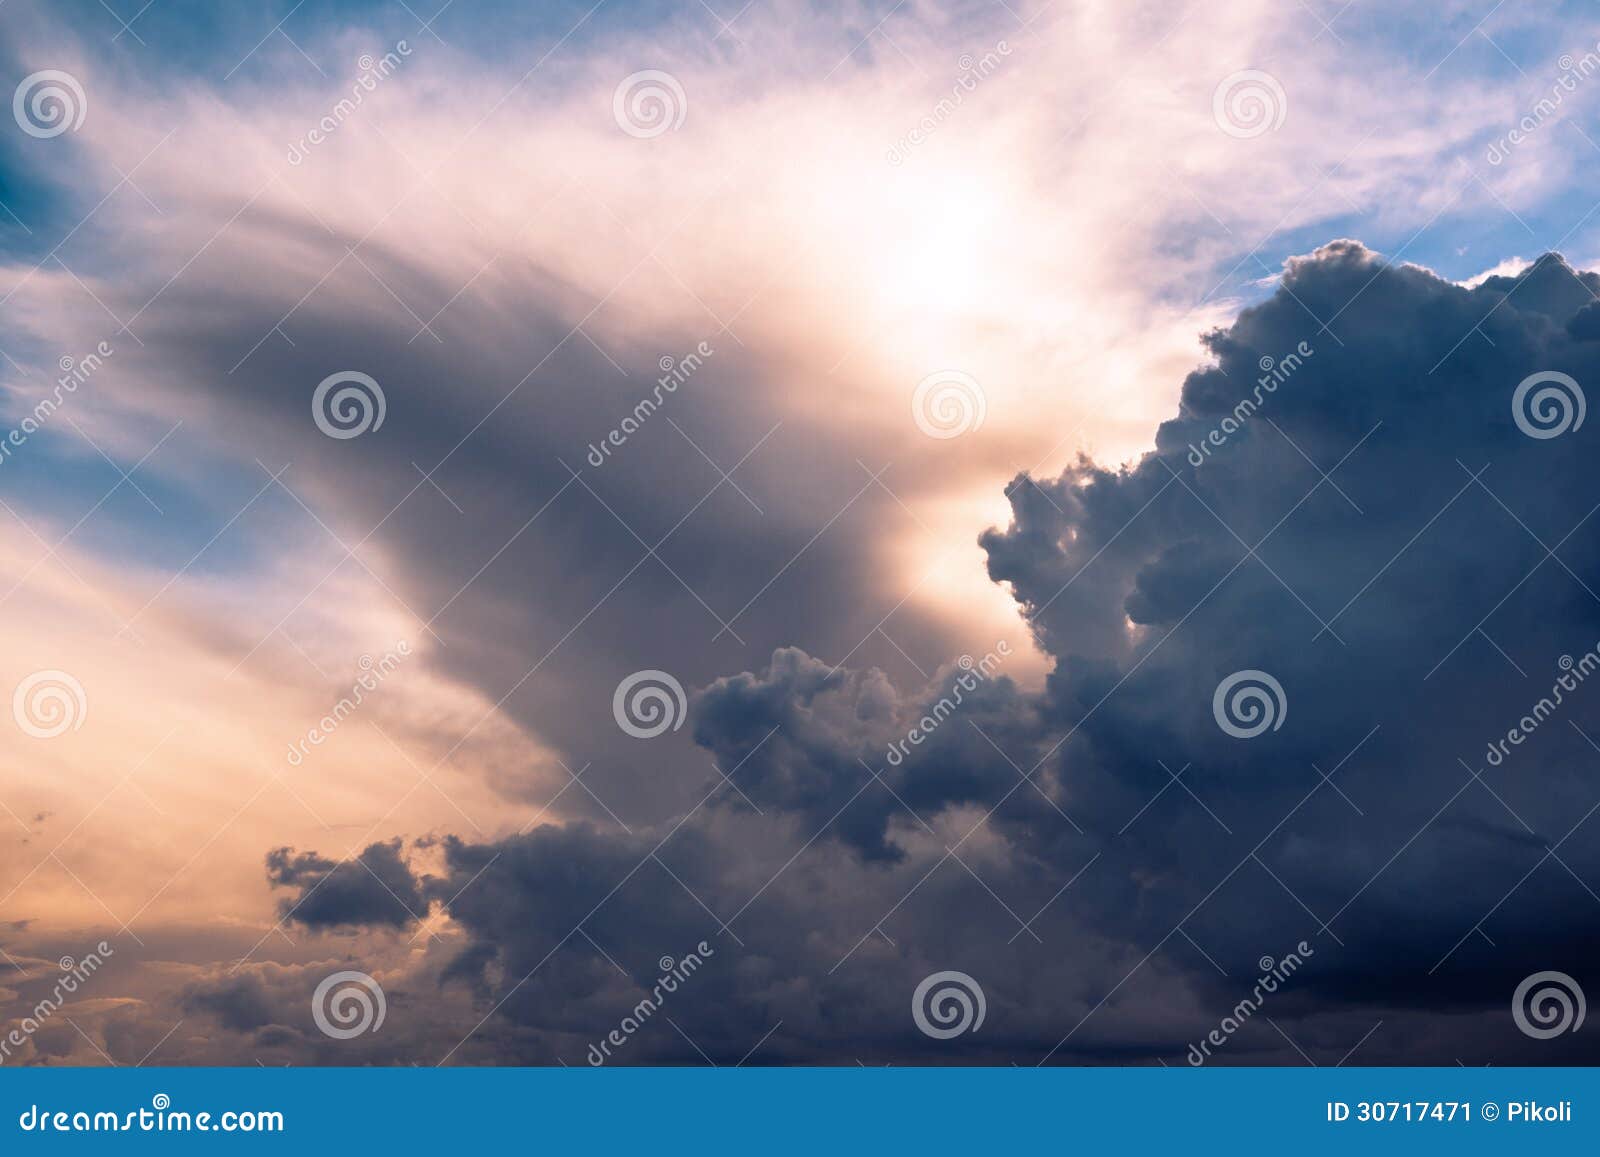 menacing sky with clouds and sun emerging through translucent clouds